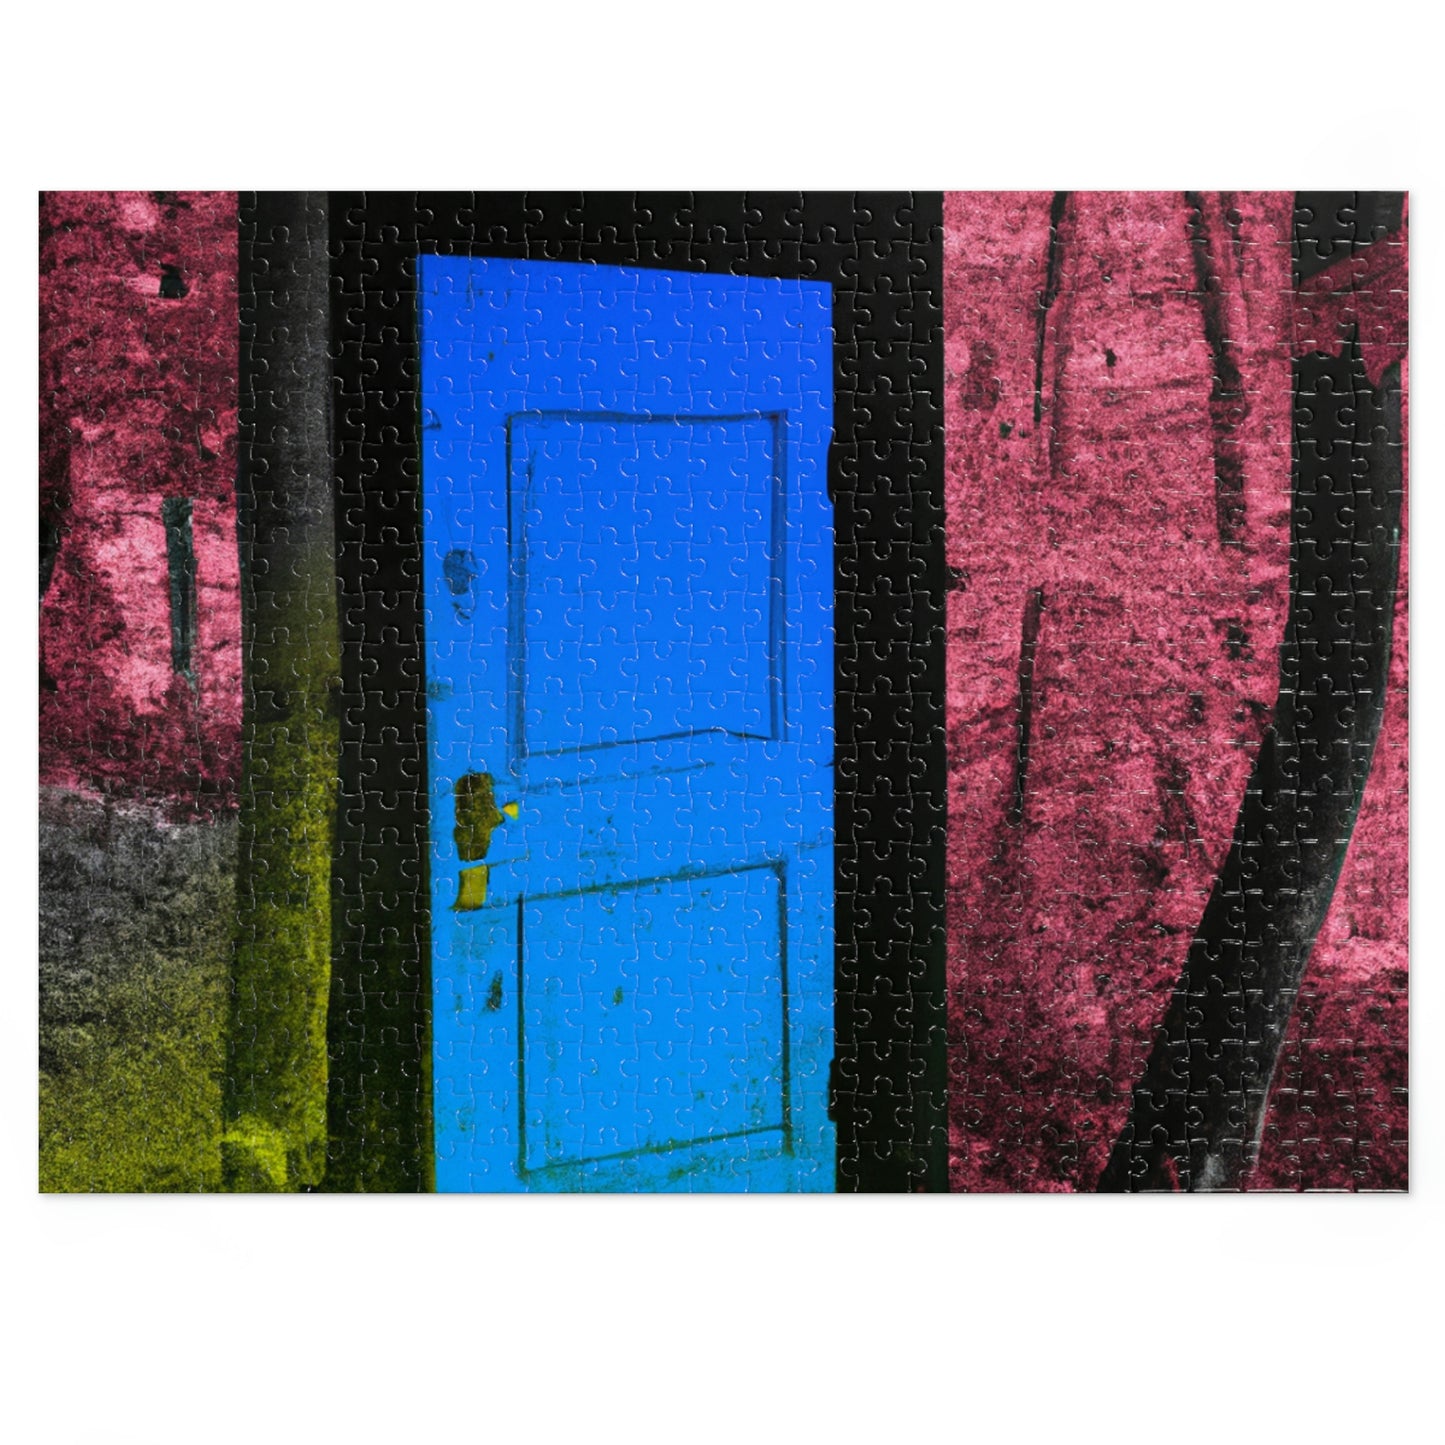 The Enigmatic Door of the Forest - The Alien Jigsaw Puzzle